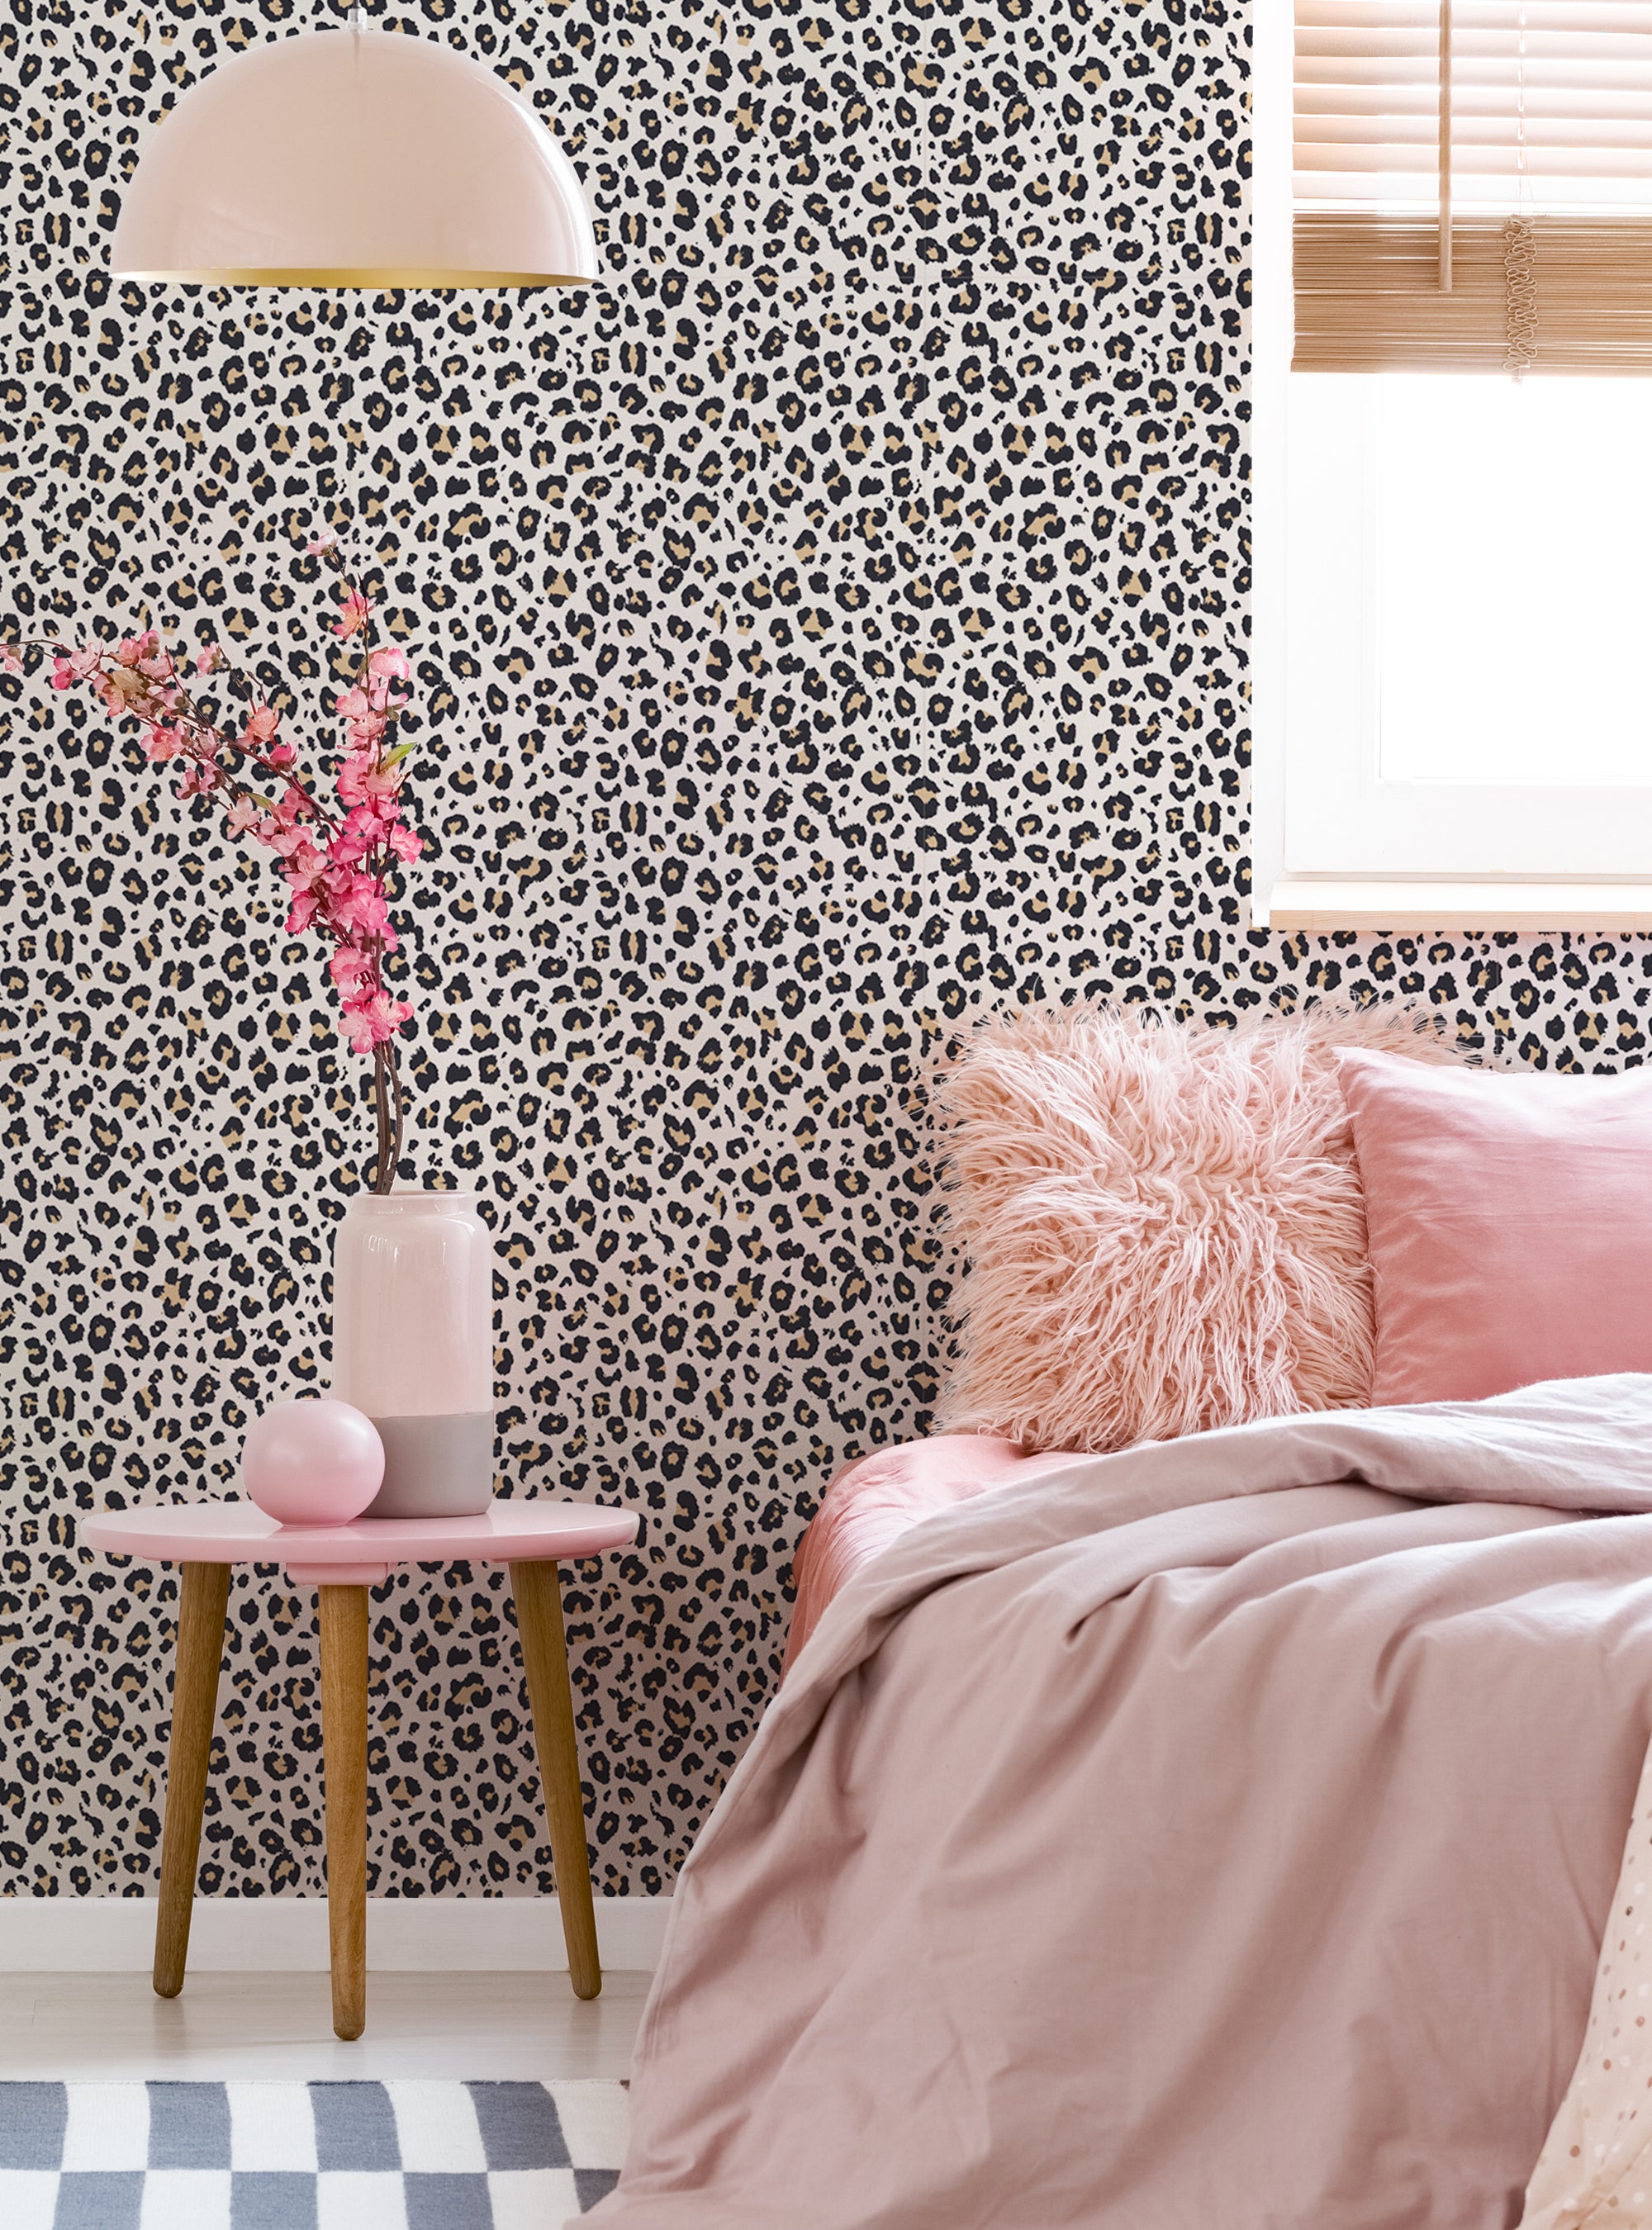 Peel and Stick Wallpaper Seamless Pink Leopard Print Leopard Self Adhesive  Removable and Contact Paper for Room Home Bedroom Living Room Decoration  Mural Wall Paper, Wall Stickers & Murals -  Canada